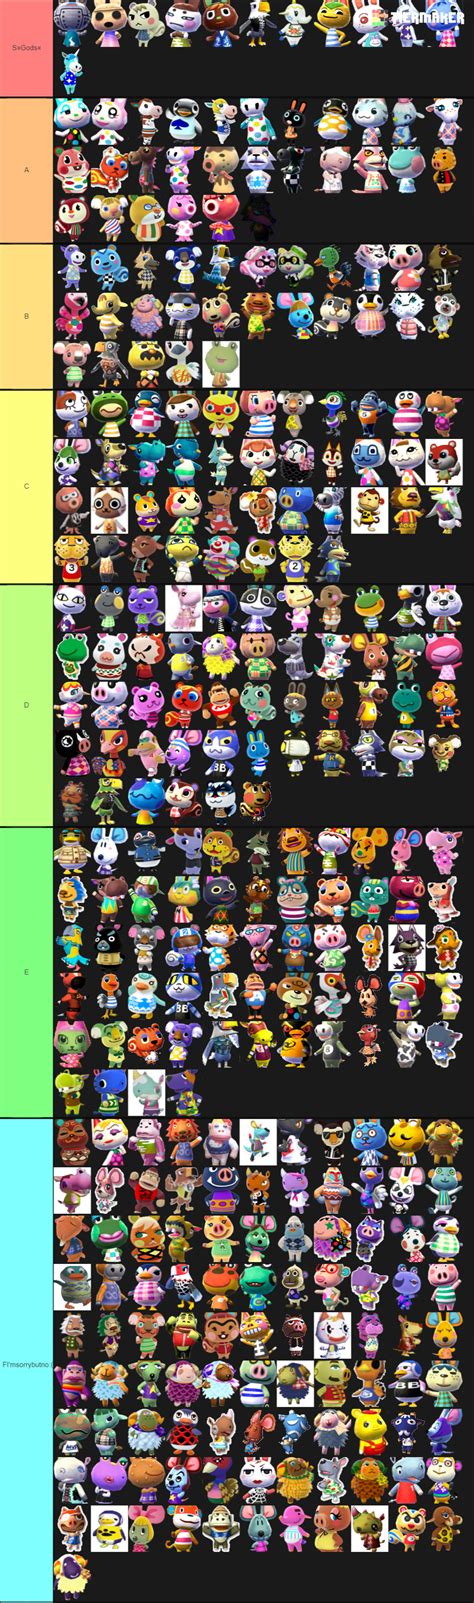 Animal crossing new horizons villager tier list. There are 397 potential villagers in Animal Crossing: New Horizons, but players only want a specific few. These highly sought after villagers are called "Dreamies." Every villager comes with their ... 